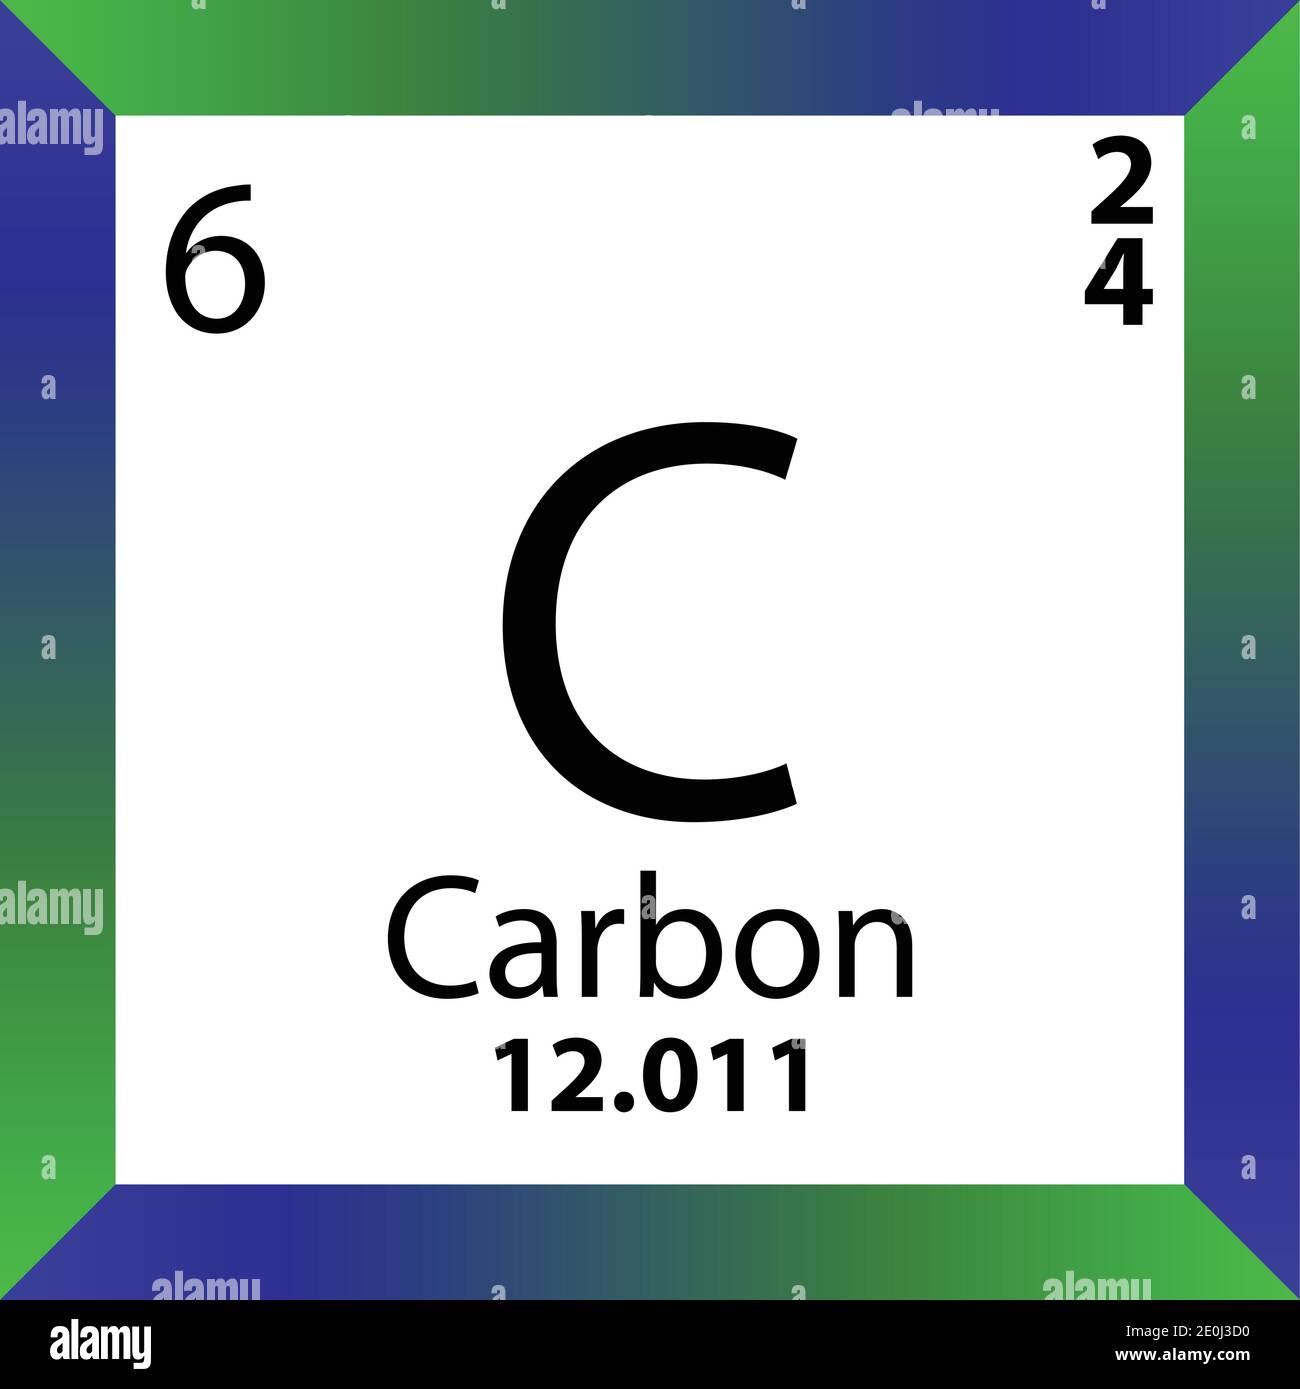 C Carbon Chemical Element Periodic Table. Single vector illustration, colorful Icon with molar mass, electron conf. and atomic number. Stock Vector